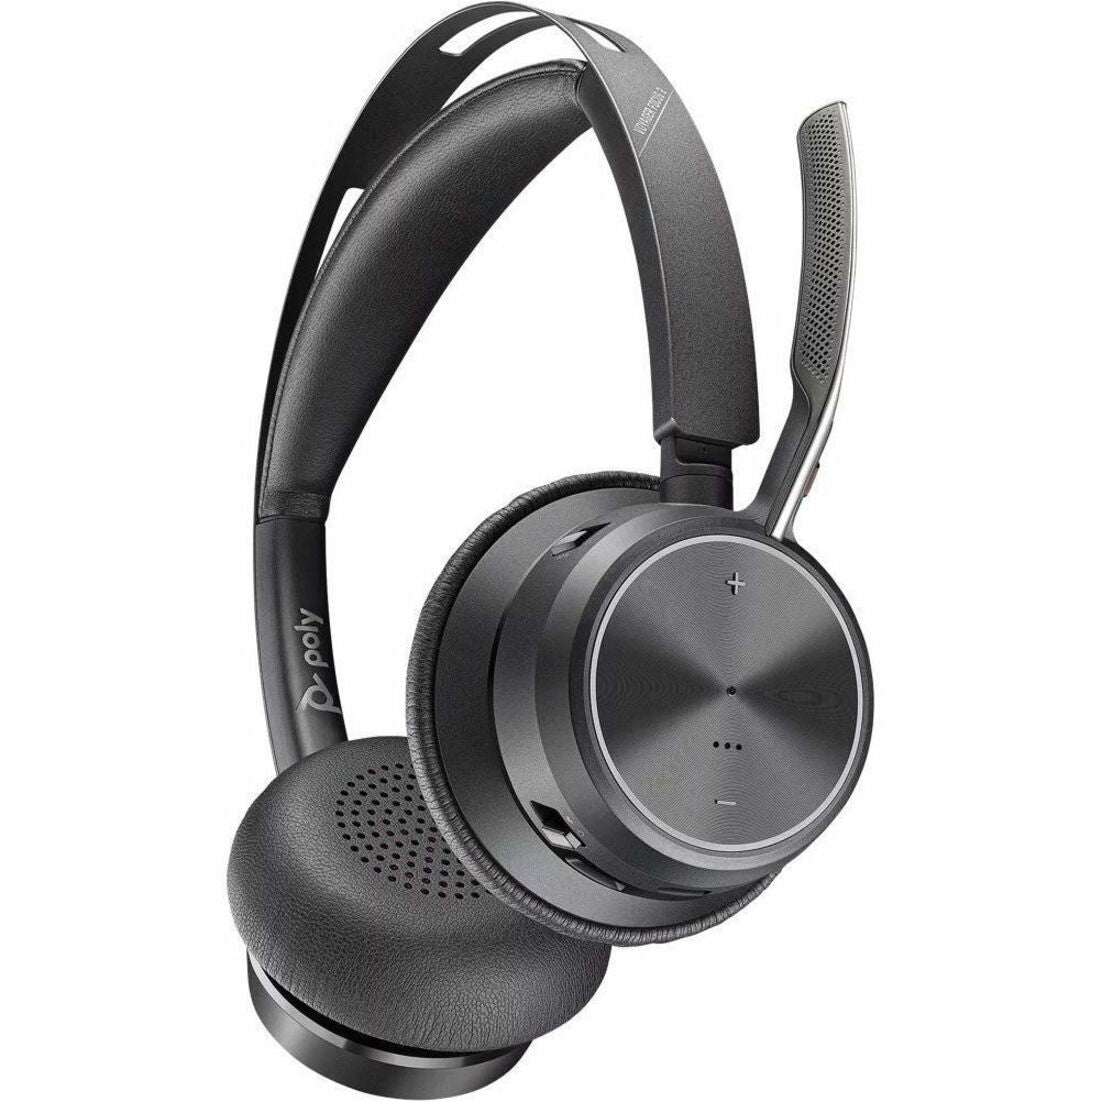 Poly 213727-01 Voyager Focus 2 Headset, Wireless Bluetooth On-ear Headphones with Noise Cancelling, Comfortable and Rechargeable, Black